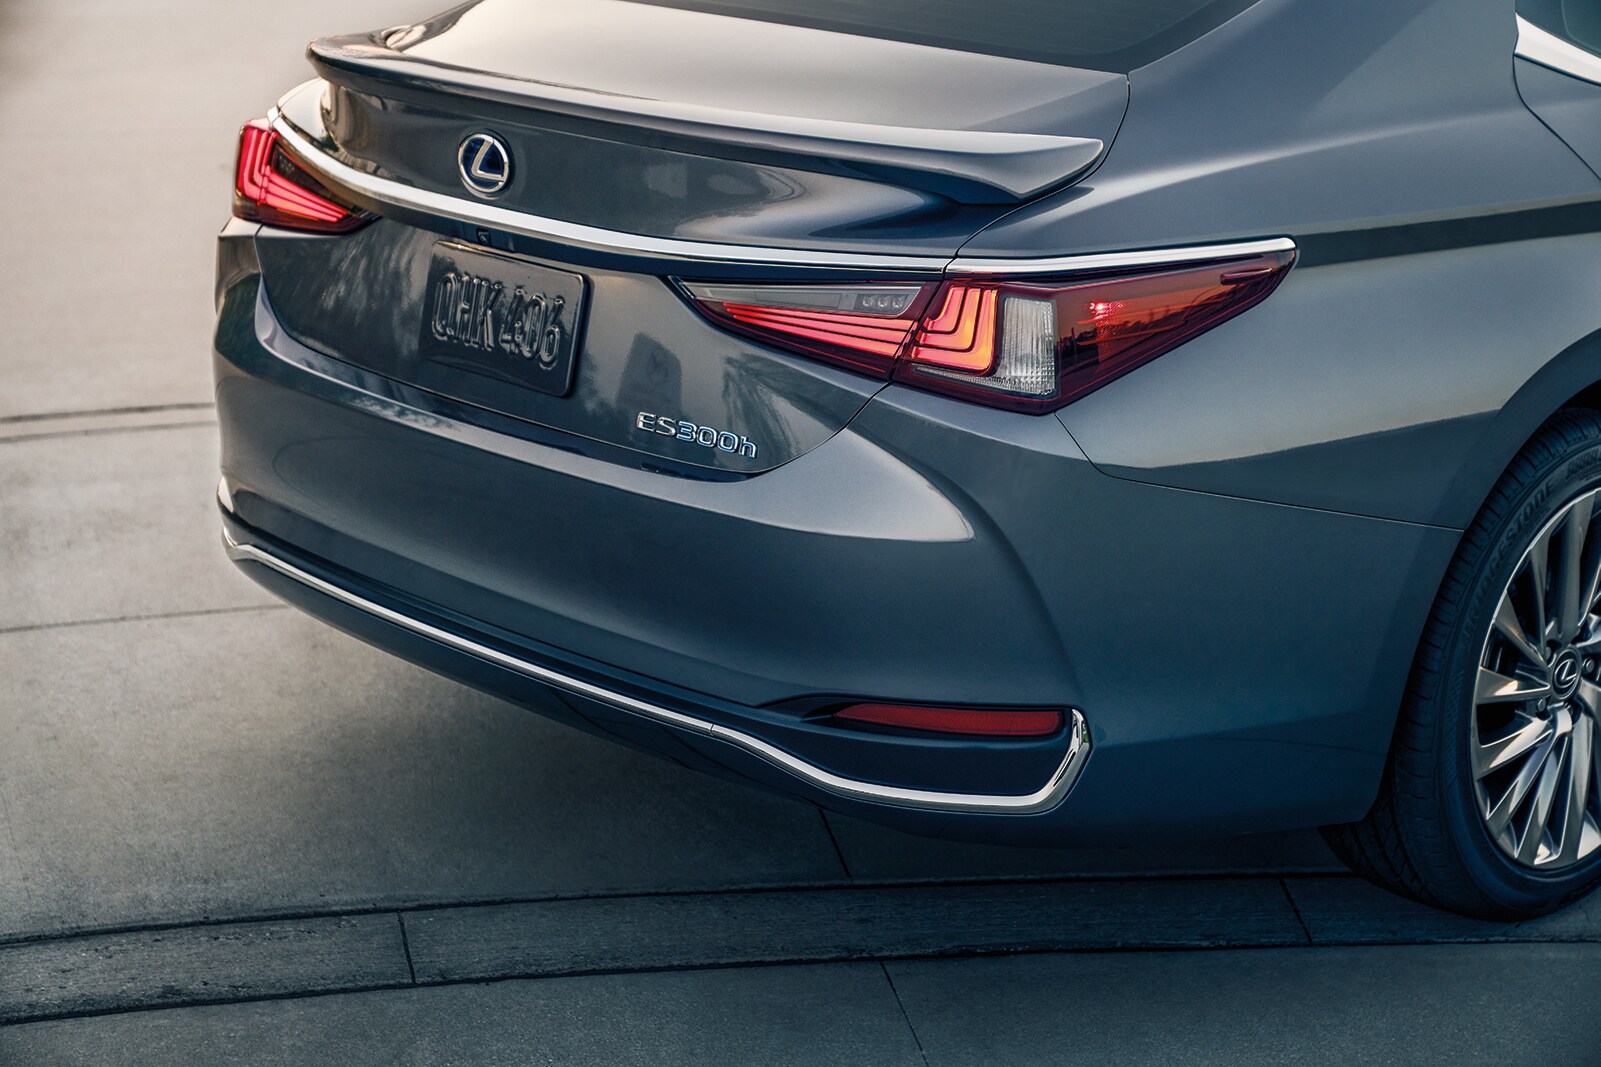 Model Features of the 2020 Lexus ES and ES Hybrid | The rearview of the 2020 Lexus ES